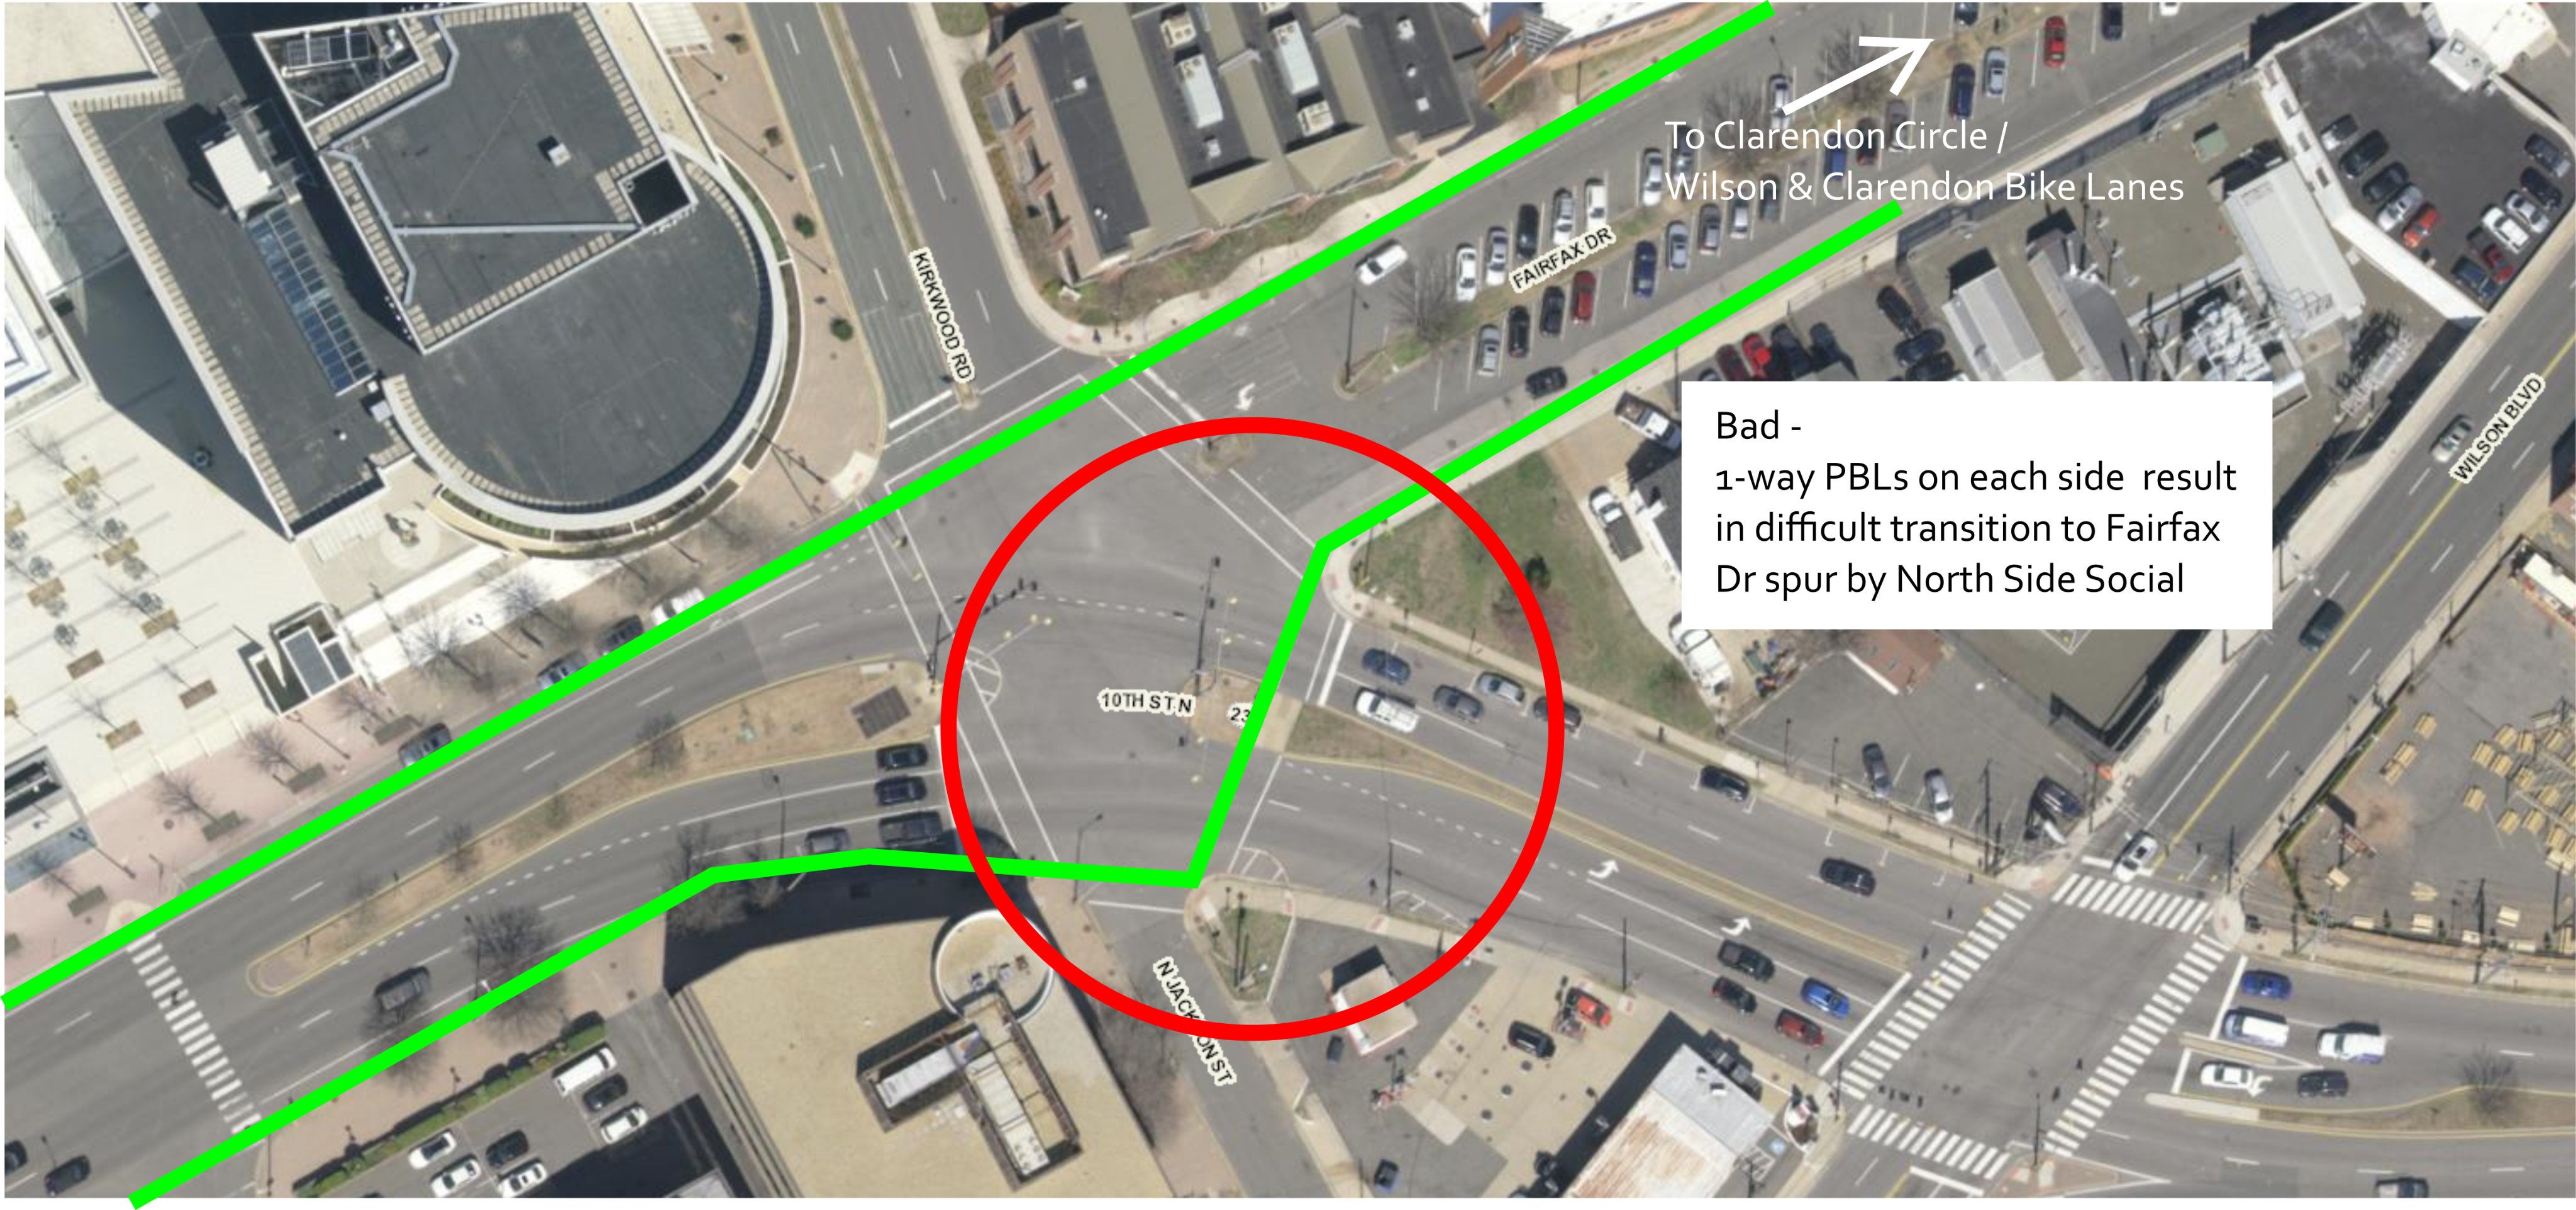 Bad: The map demonstrates how in a pair of 1-way PBLs, the eastbound cyclists would need to make an awkward and poorly-supported left turn to get onto the Fairfax Drive spur behind North Side Social.